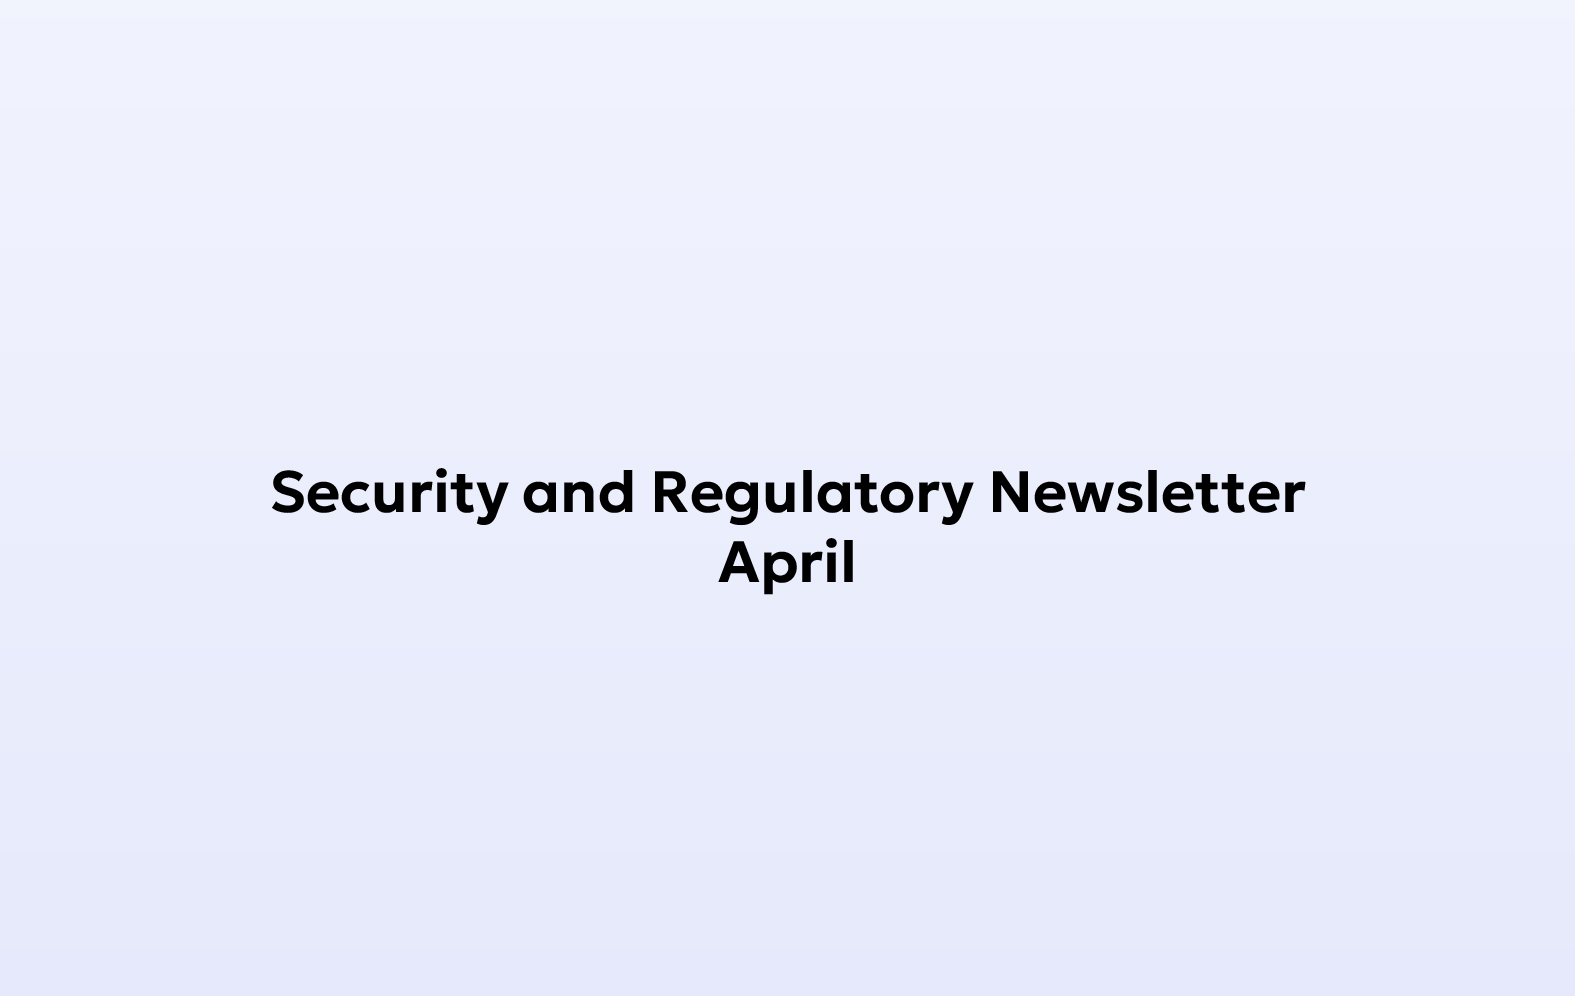 Monthly Security and Regulatory Newsletter